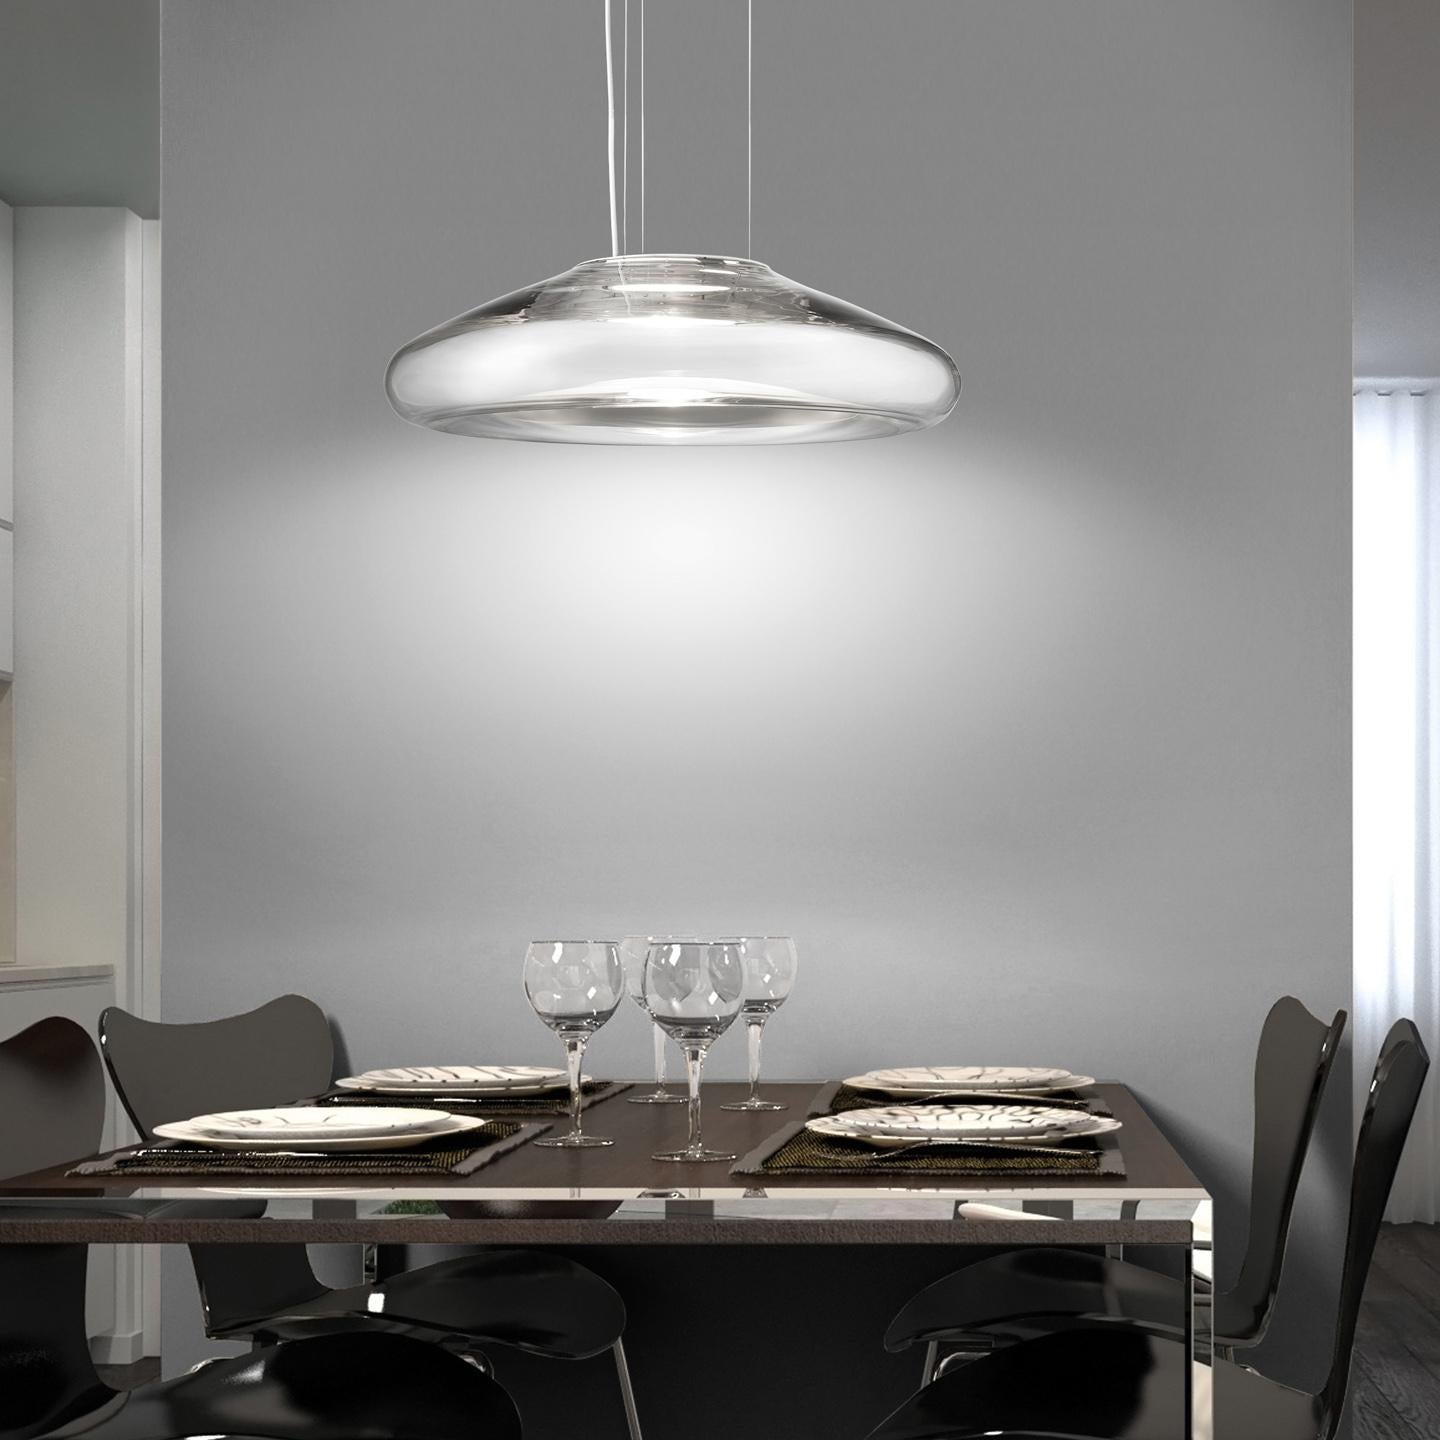 The Keyra creates beautiful light for your home, office or contract space with its beautiful contemporary shape and unique finish. Designed by Roberto Paoli in 2011, the Keyra’s hand blown shape dimples in the middle and becomes translucent. This